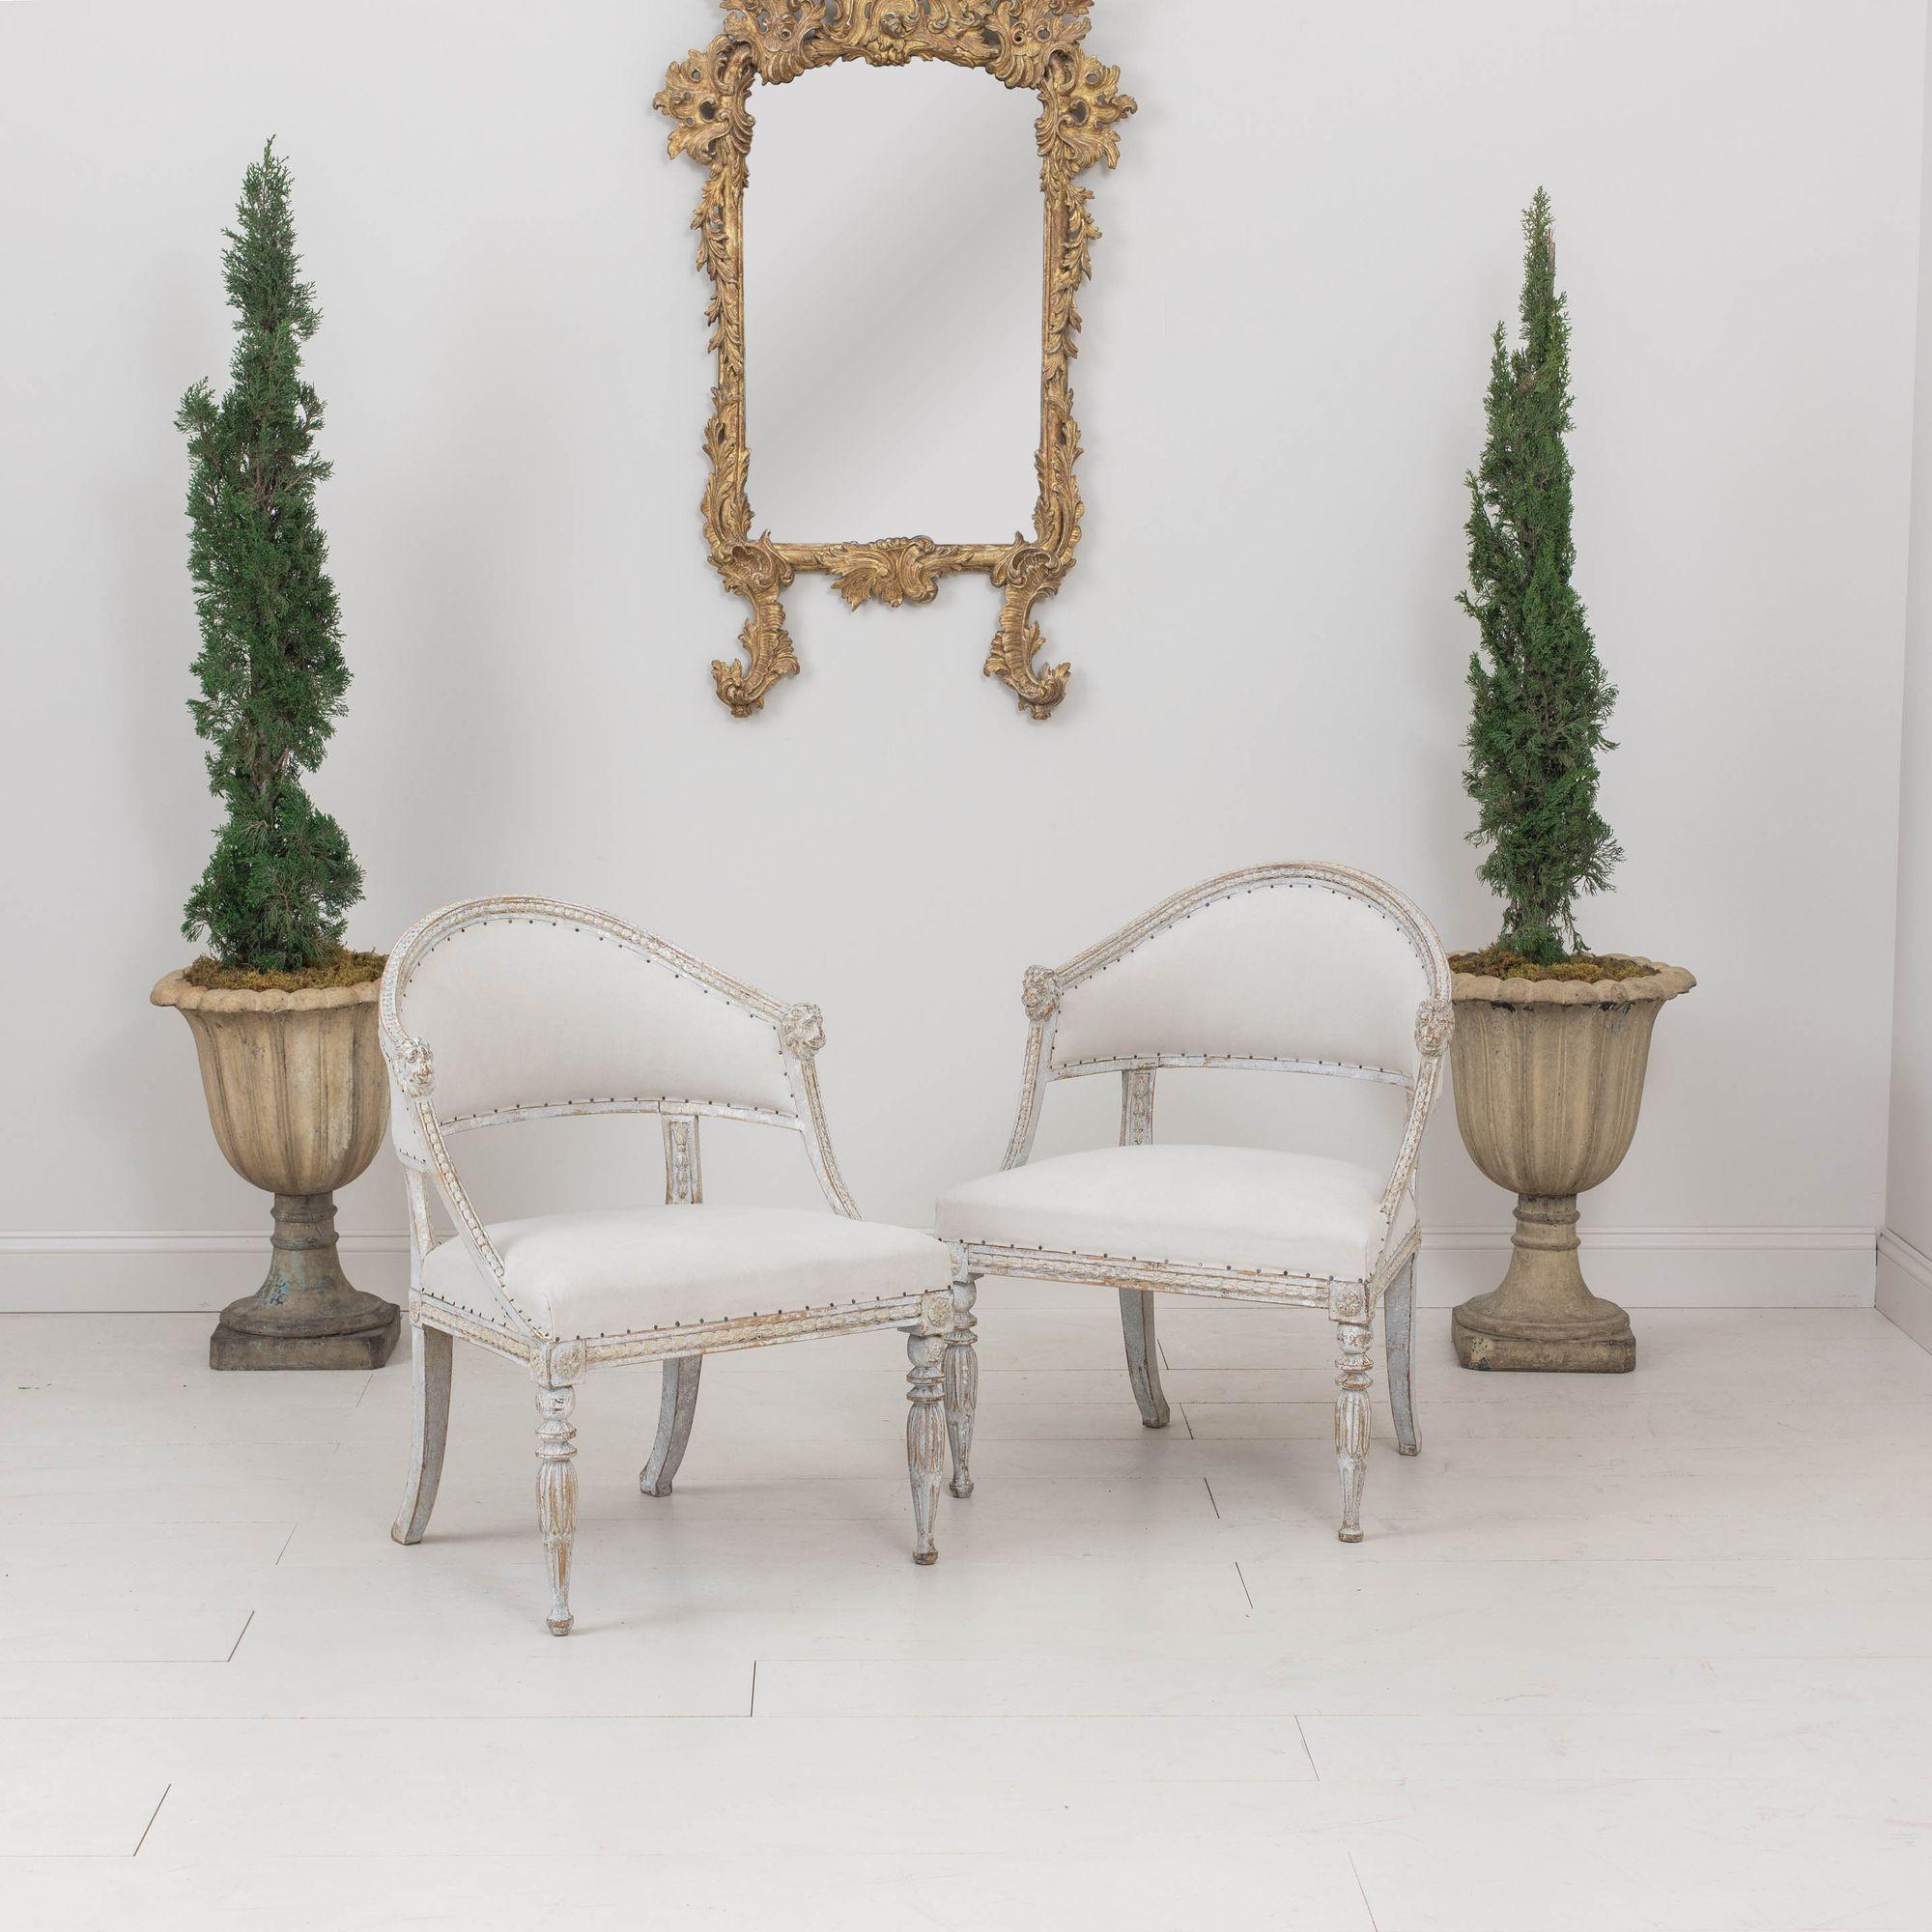 A pair of Swedish antique barrel back armchairs in the Gustavian style, circa 1880. These stunning chairs have shaped barrel backs with lion head carvings. The frame features carved bell flowers with front legs adorned with lotus flowers and